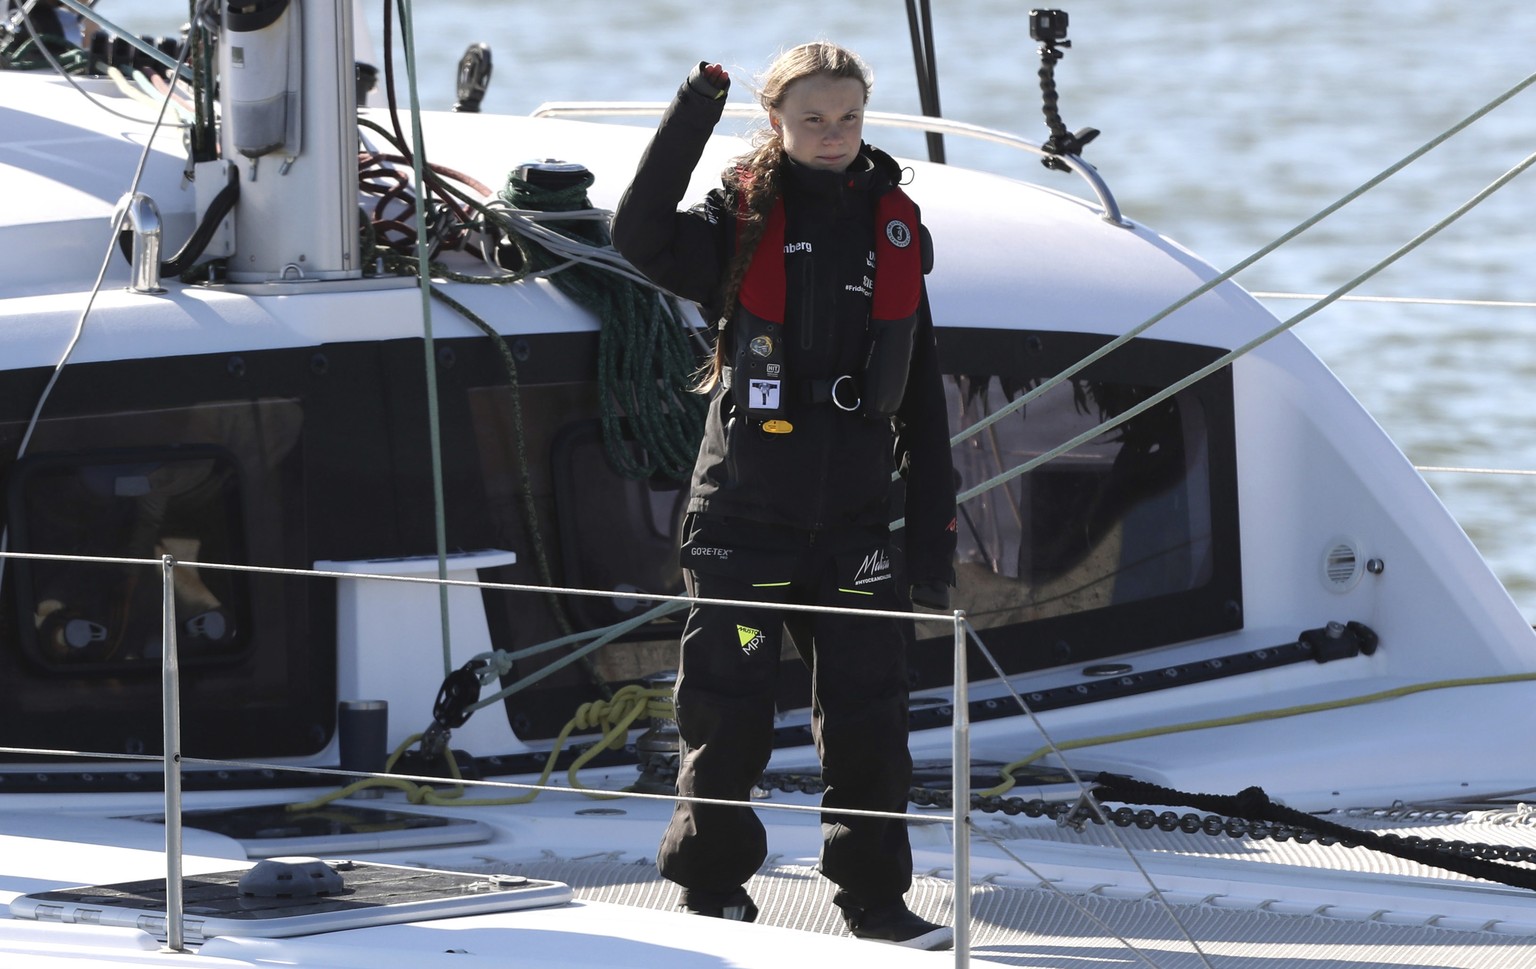 Climate activist Greta Thunberg waves as she arrives in Lisbon aboard the sailboat La Vagabonde Tuesday, Dec 3, 2019. Thunberg has arrived by catamaran in the port of Lisbon after a three-week voyage  ...